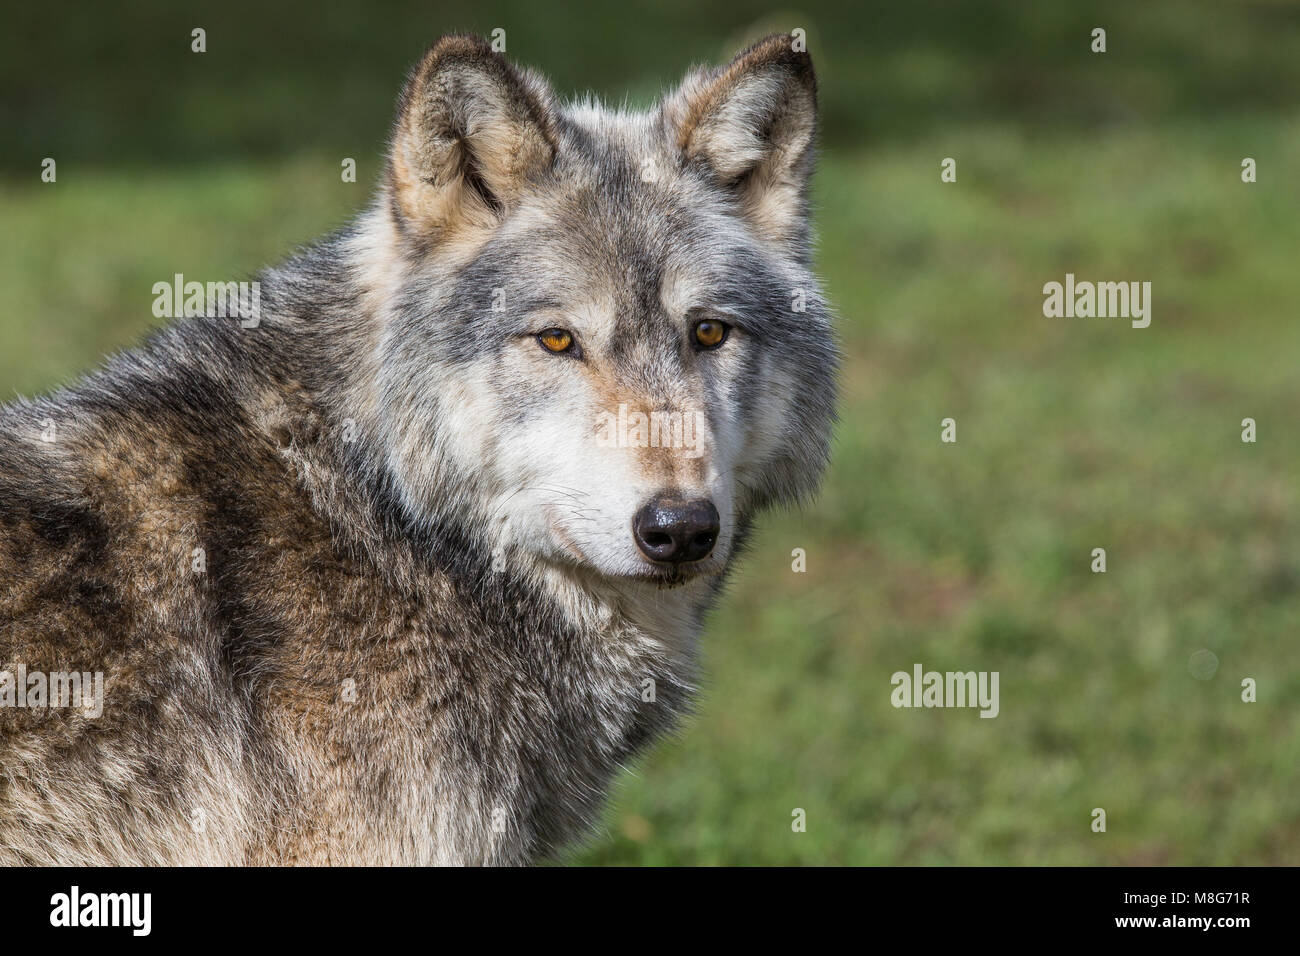 Wolf Pictured In Woodland In The Uk Taken In 2018, near Beenham, Wolves part of a conservation program, and public awareness of the difficulties these. Stock Photo